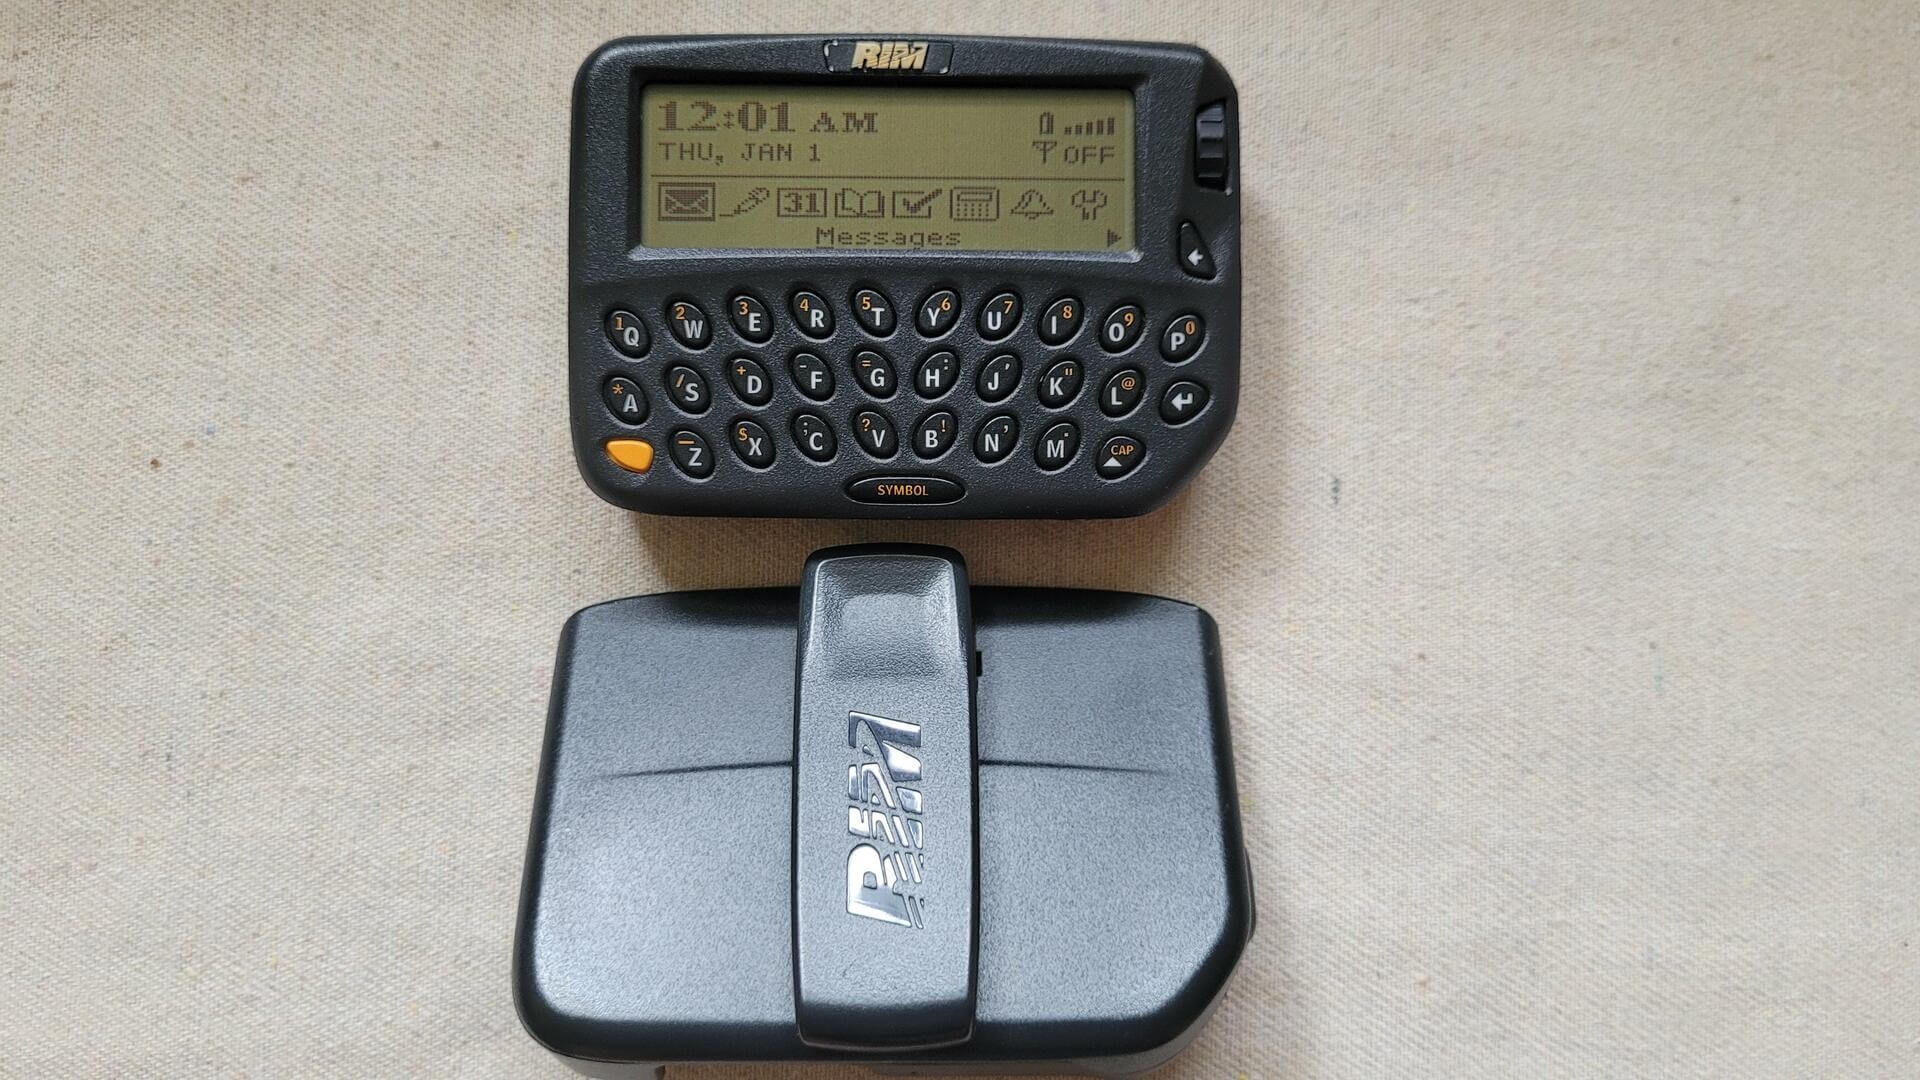 blackberry-research-in-motion-rim-950-interactive-two-way-pager-pda-wit-original-holster-and-charging-station-vintage-canadiana-and-collectible-electonic-device